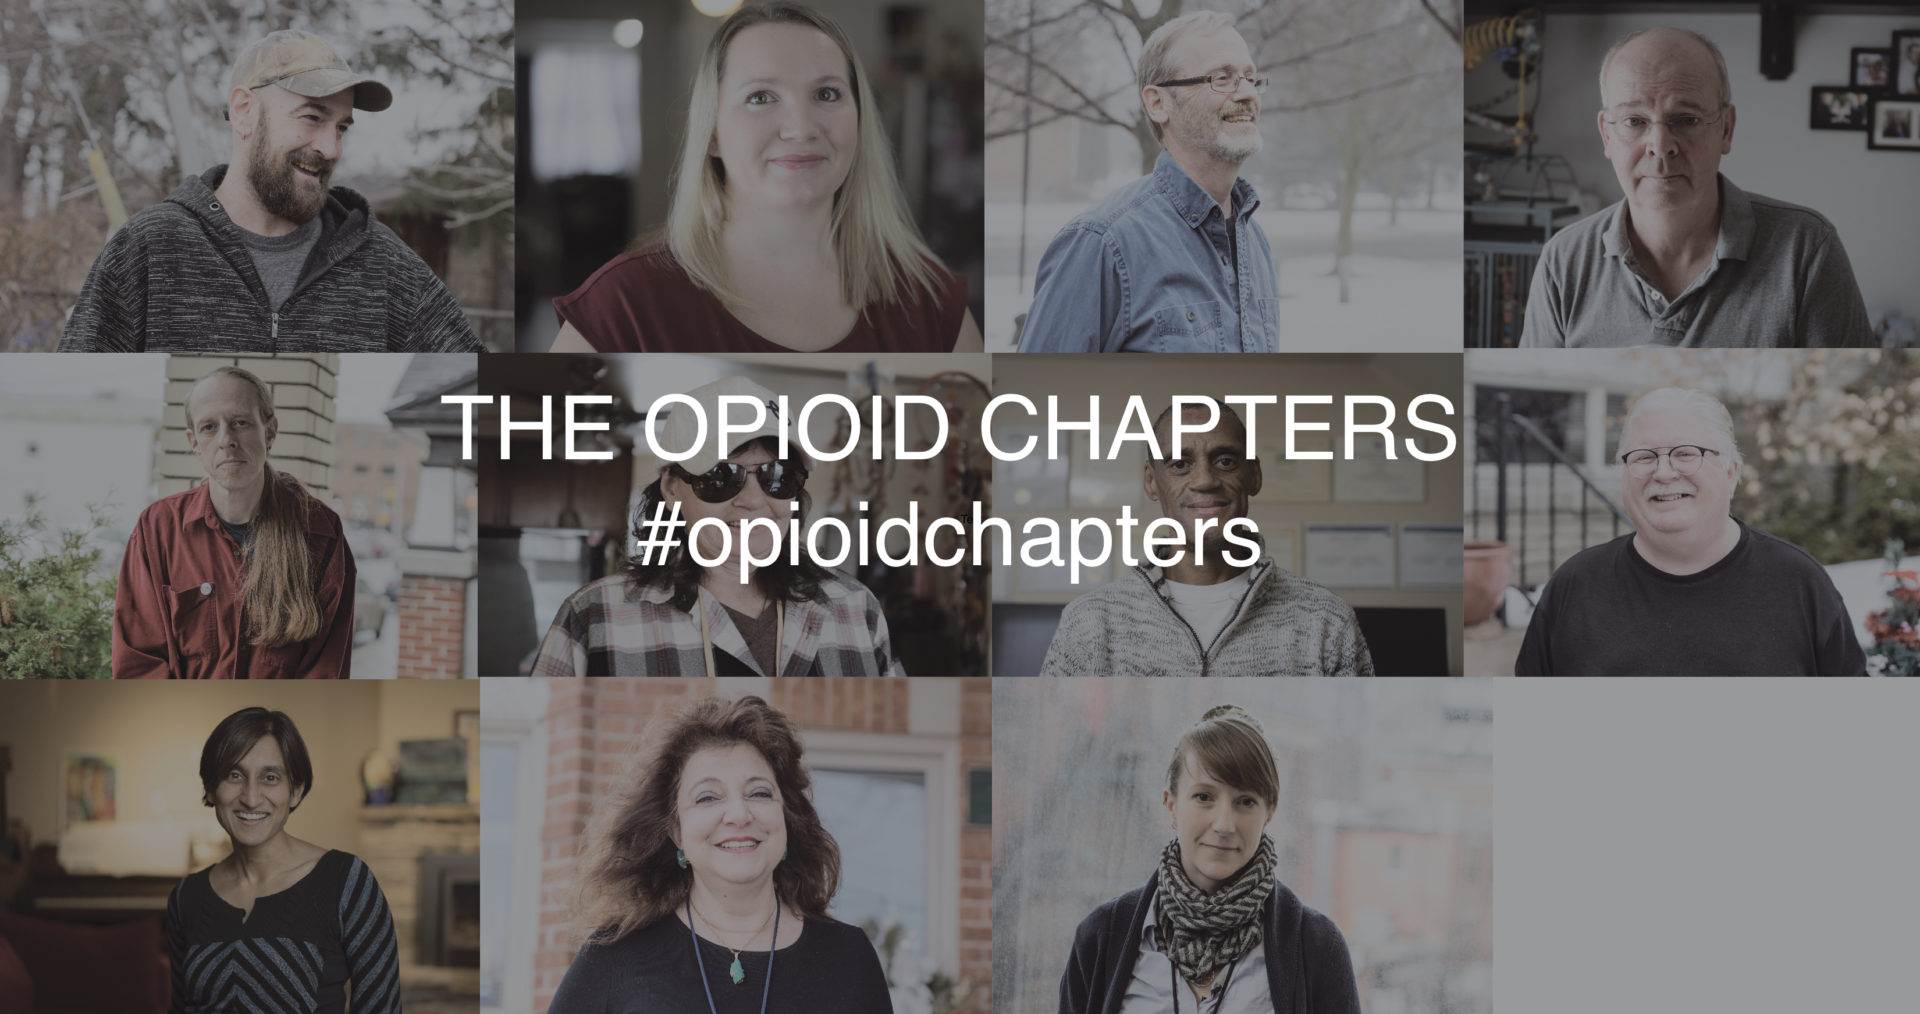 Credit: The Opioid Chapters.